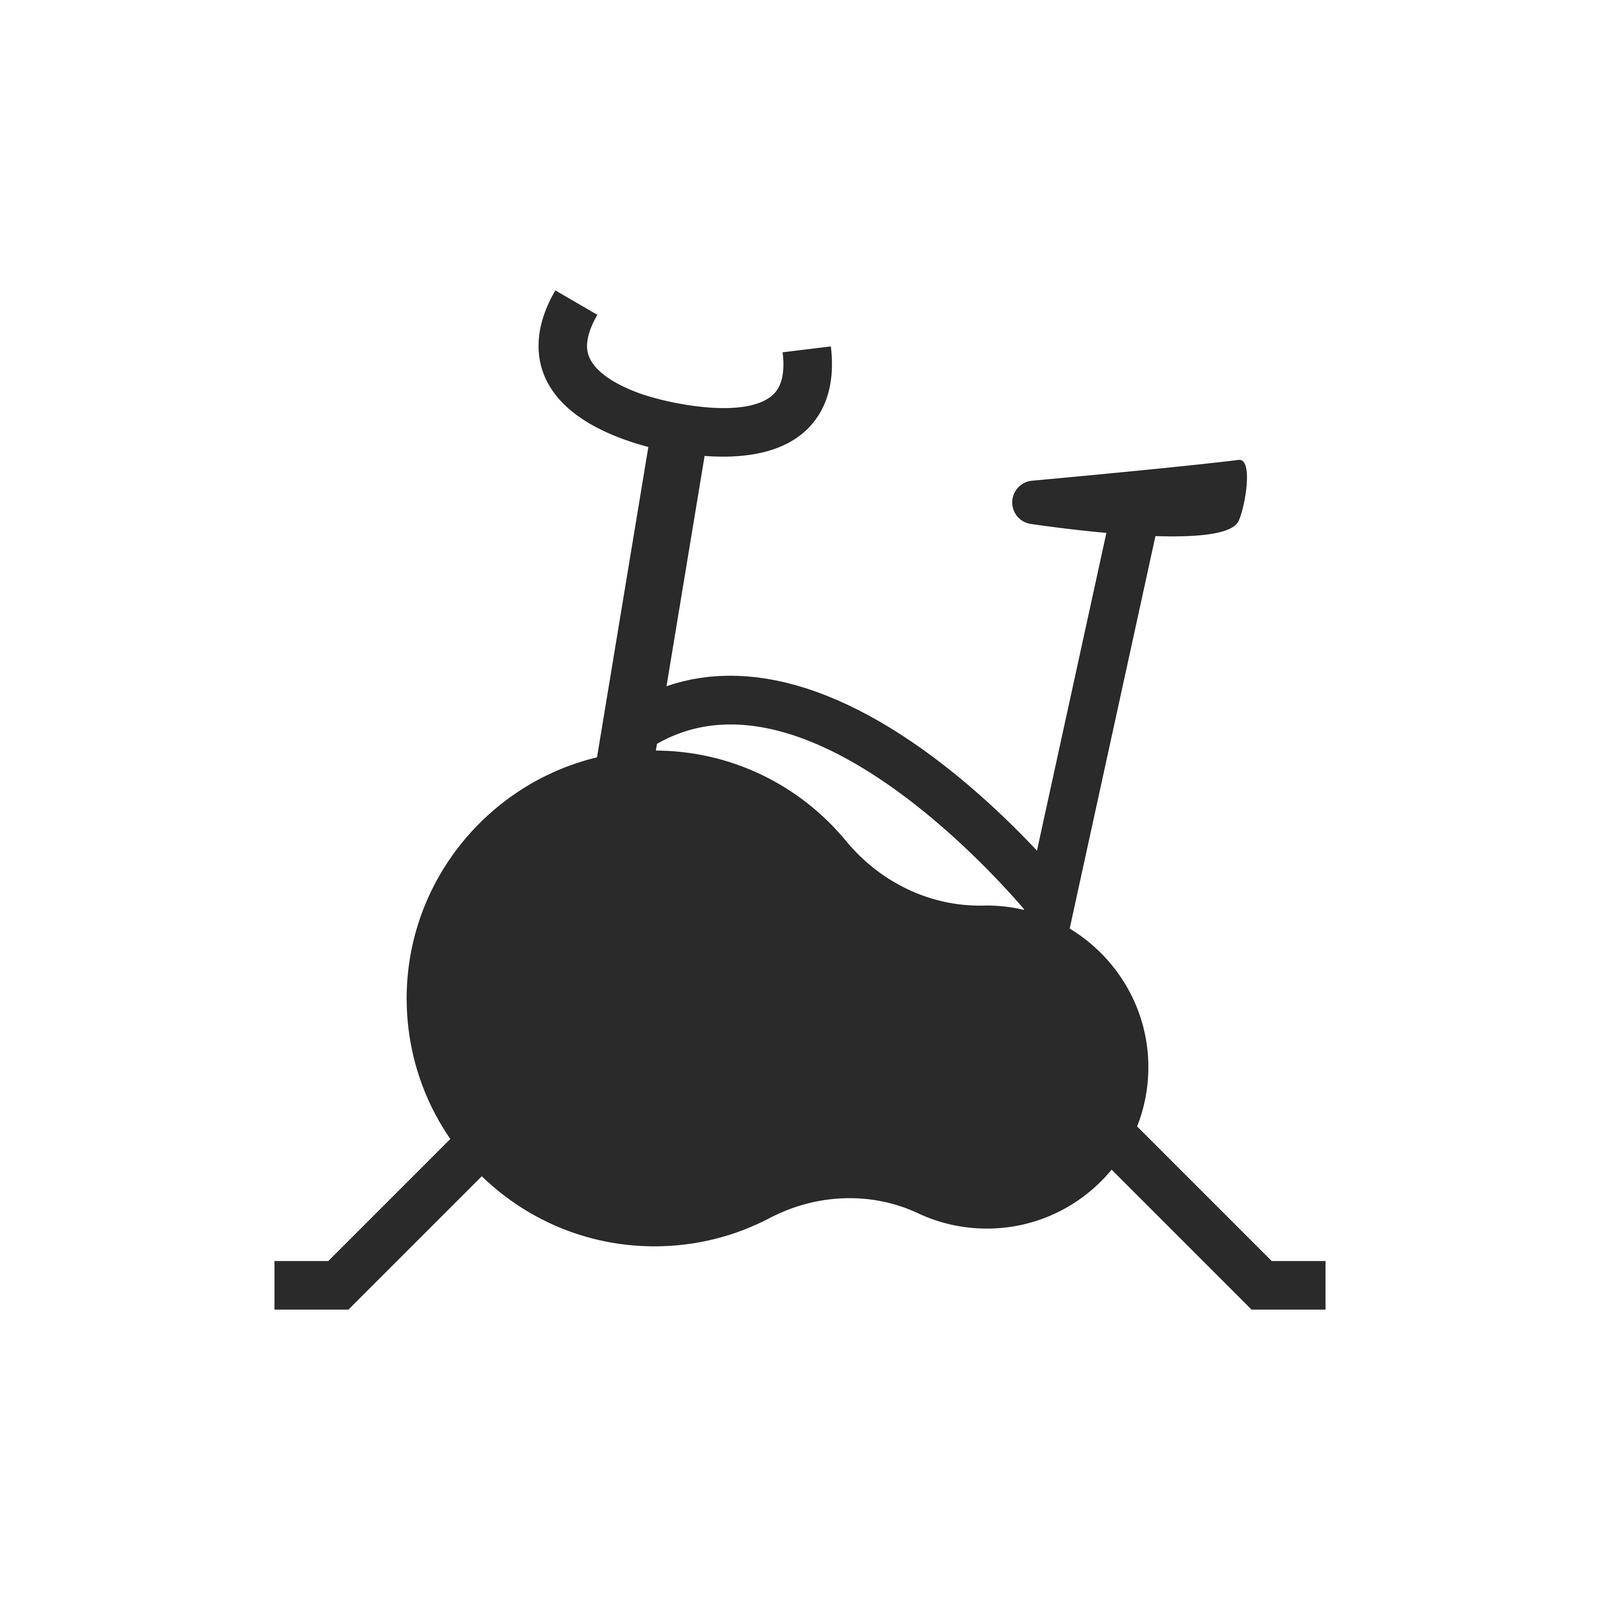 Exercise bicycle fitness icon by awk